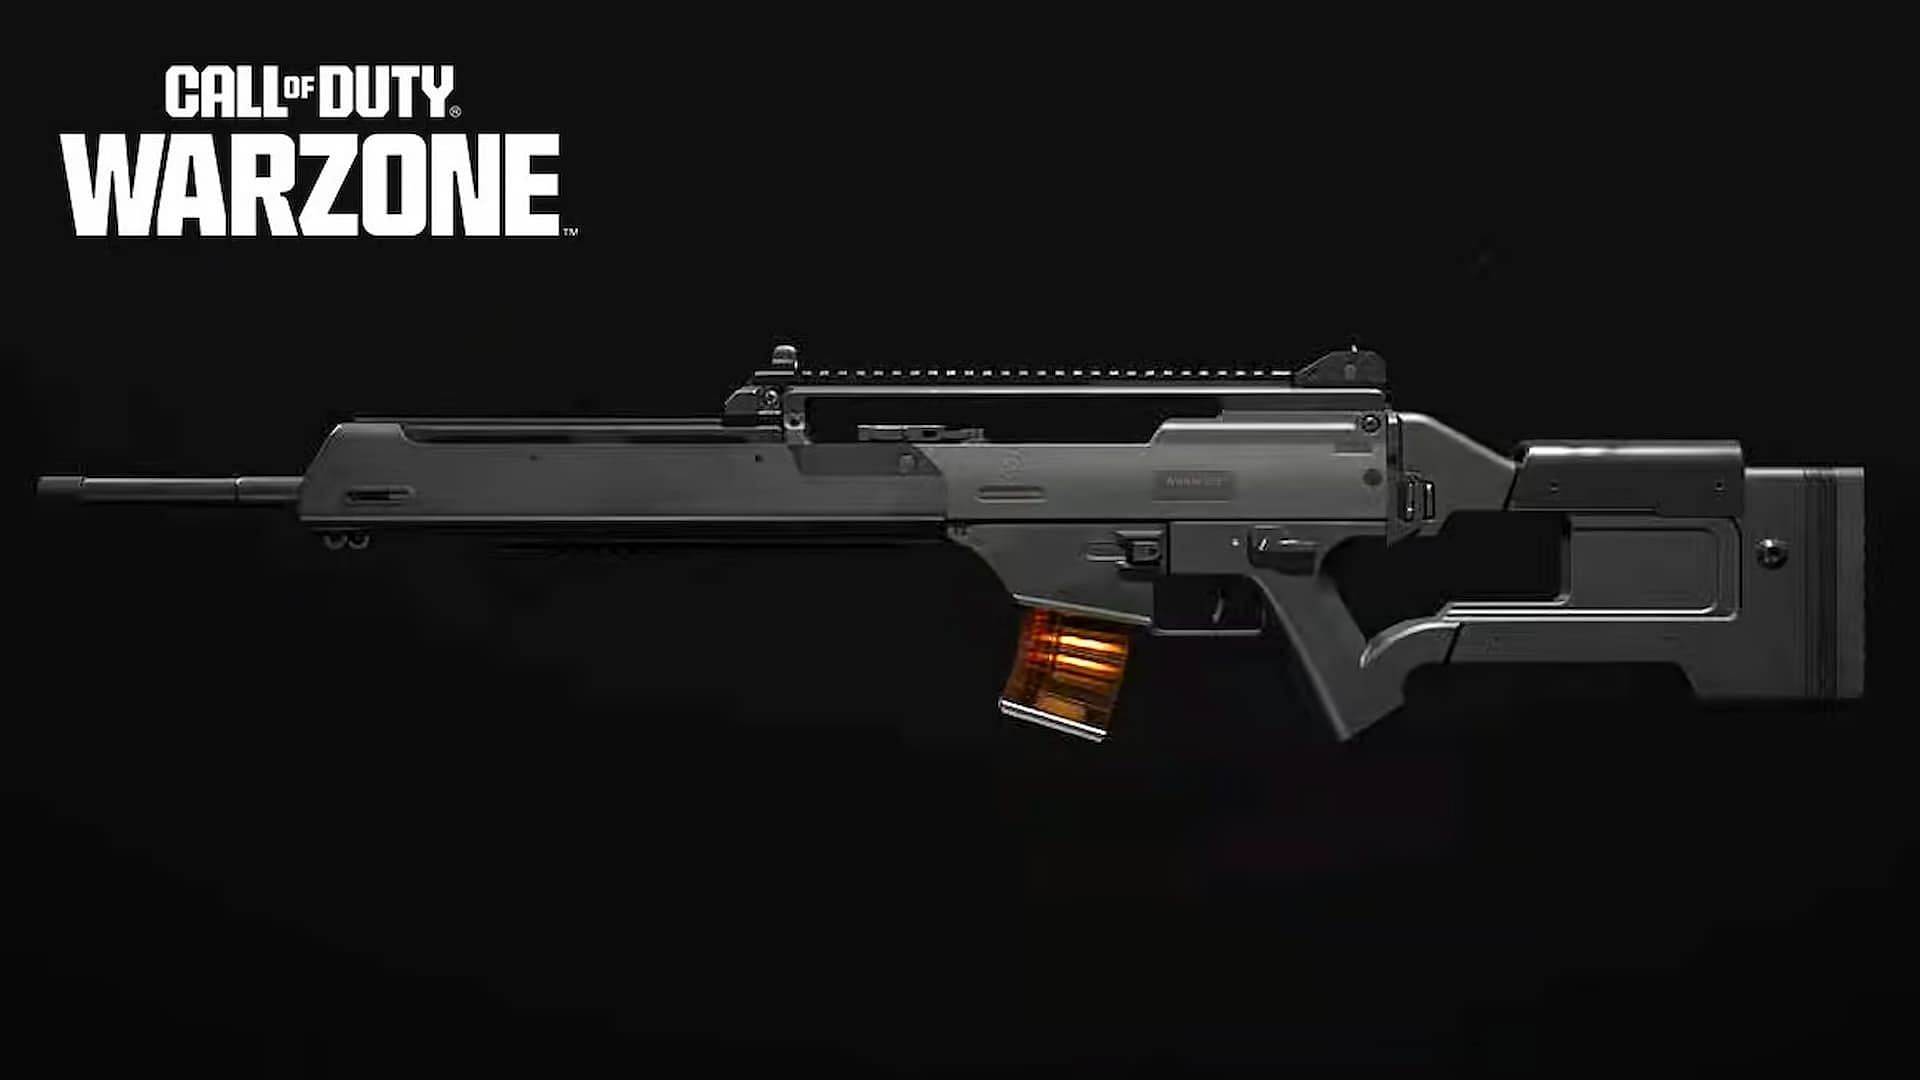 DM 56 loadout in Warzone (Image via Activision)